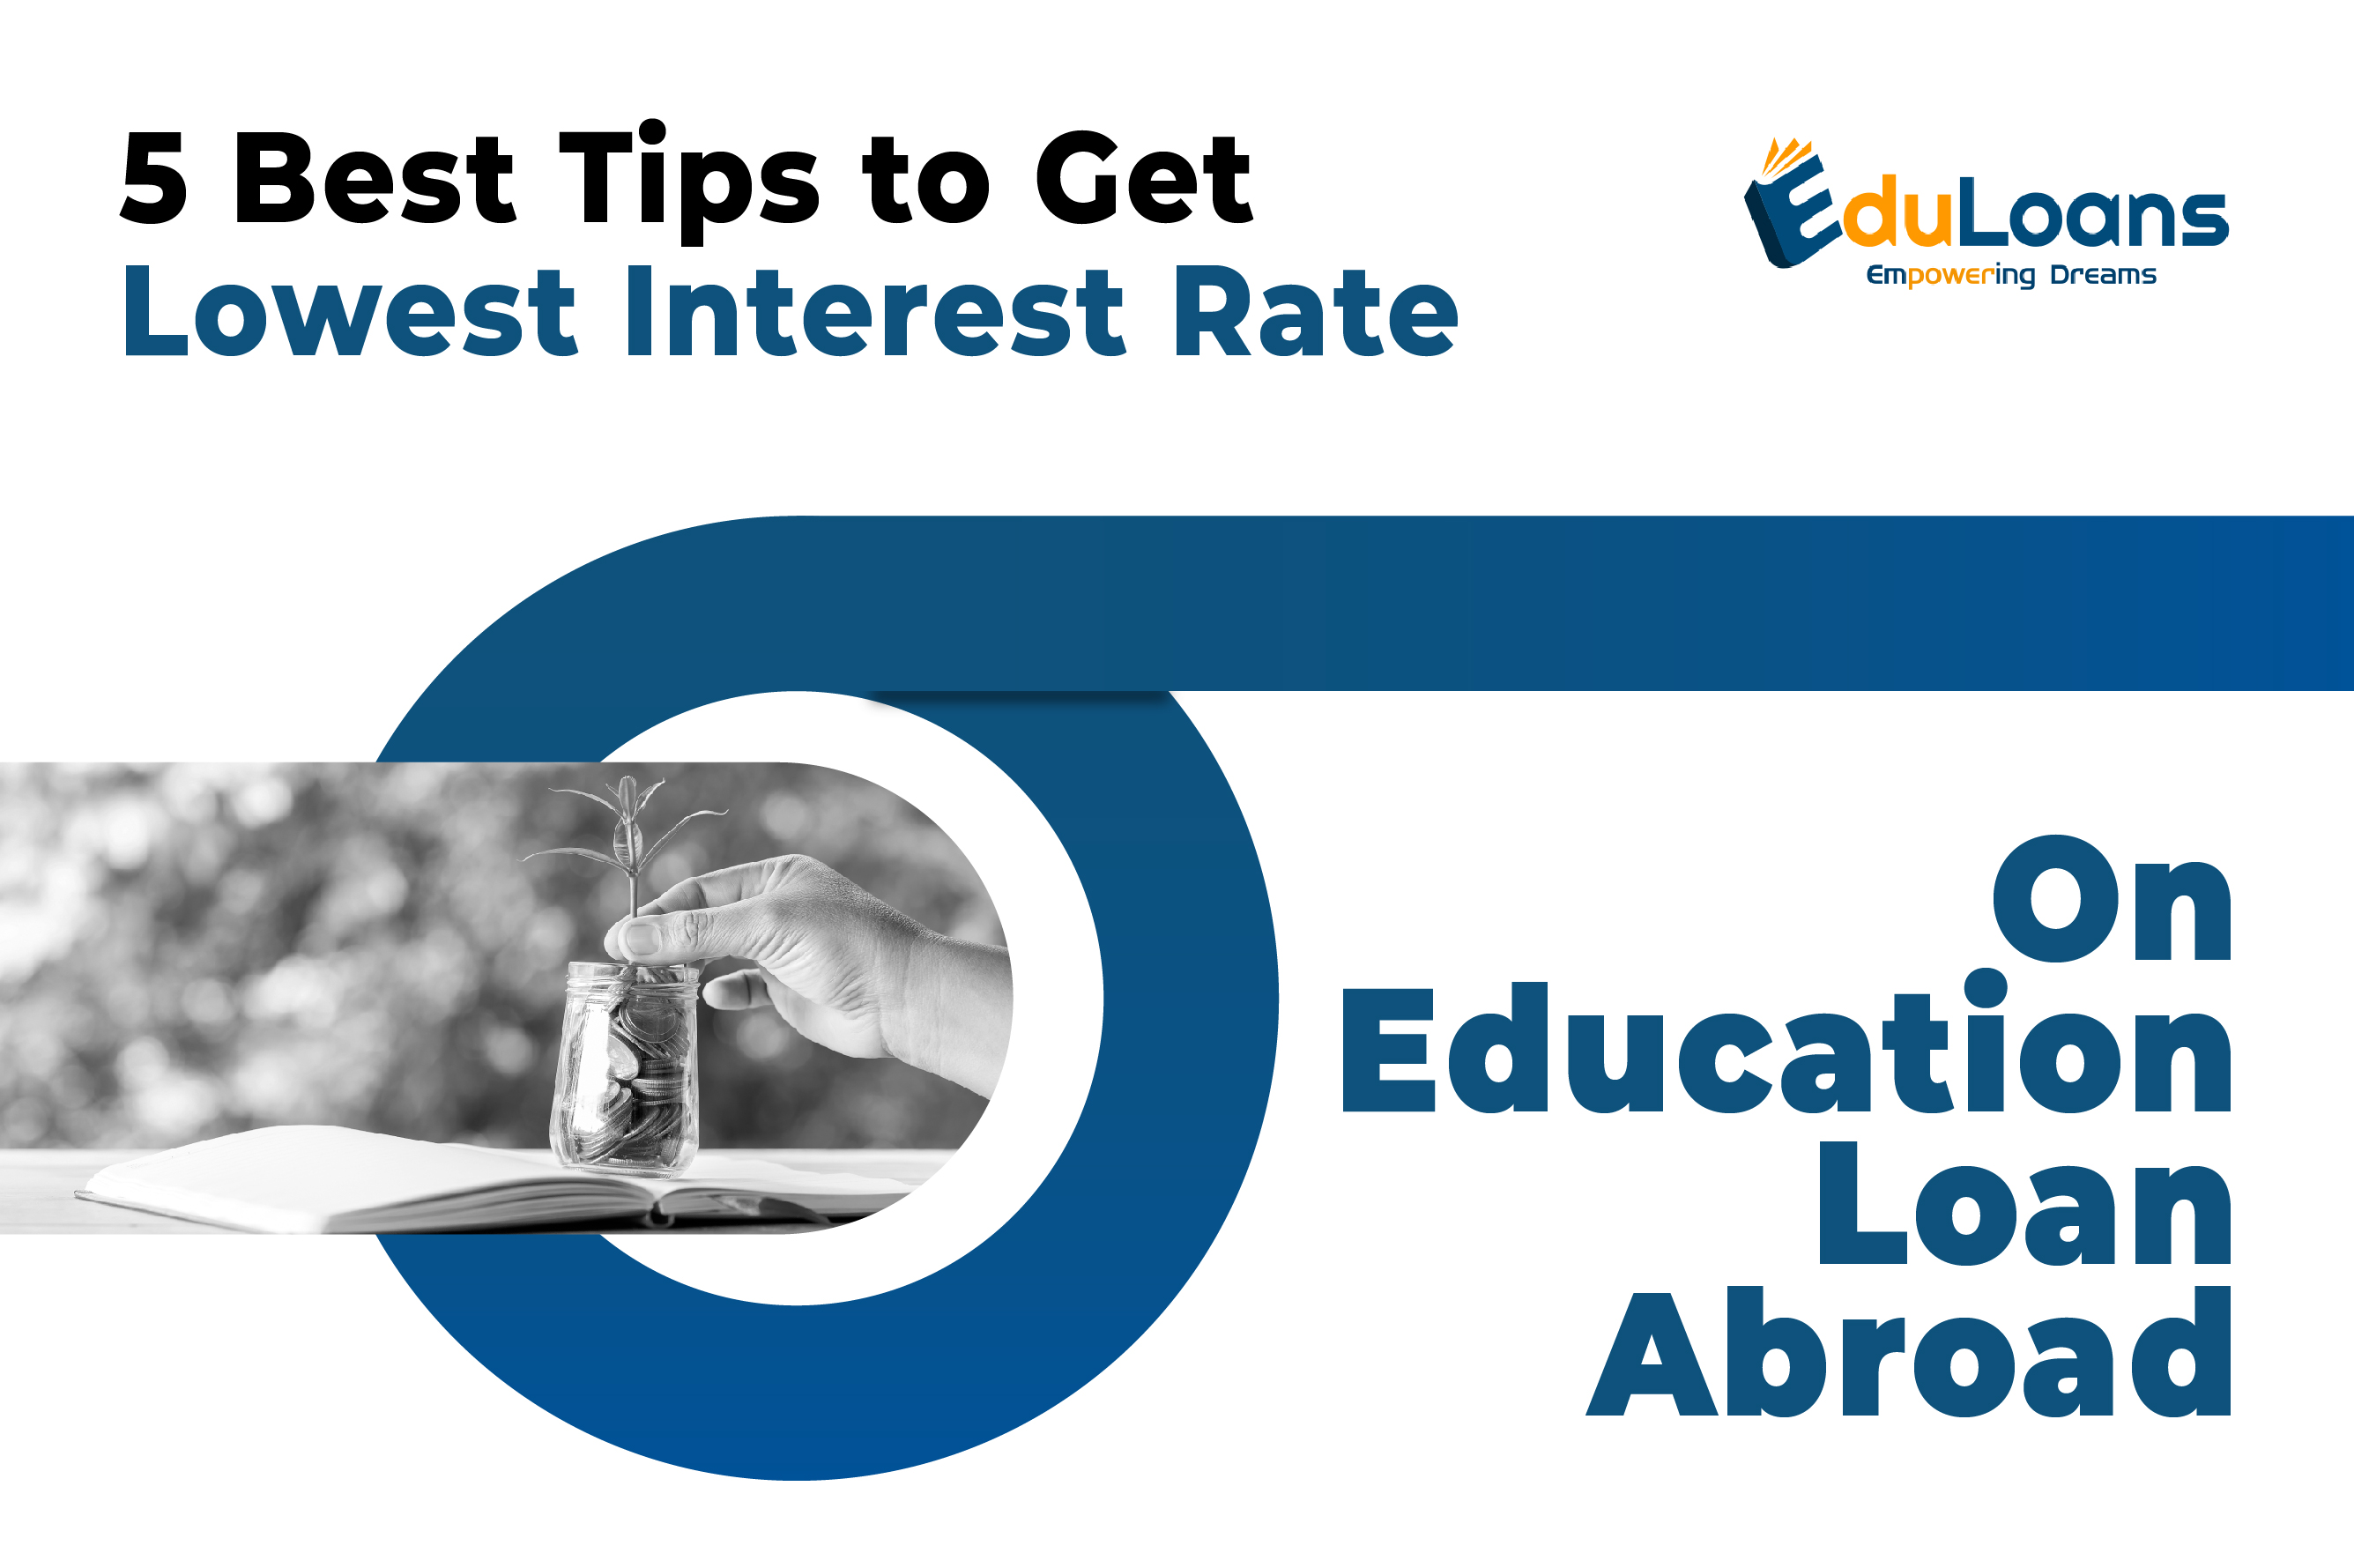 5 Best Tips to Get Lowest Interest Rate on Education Loan Abroad